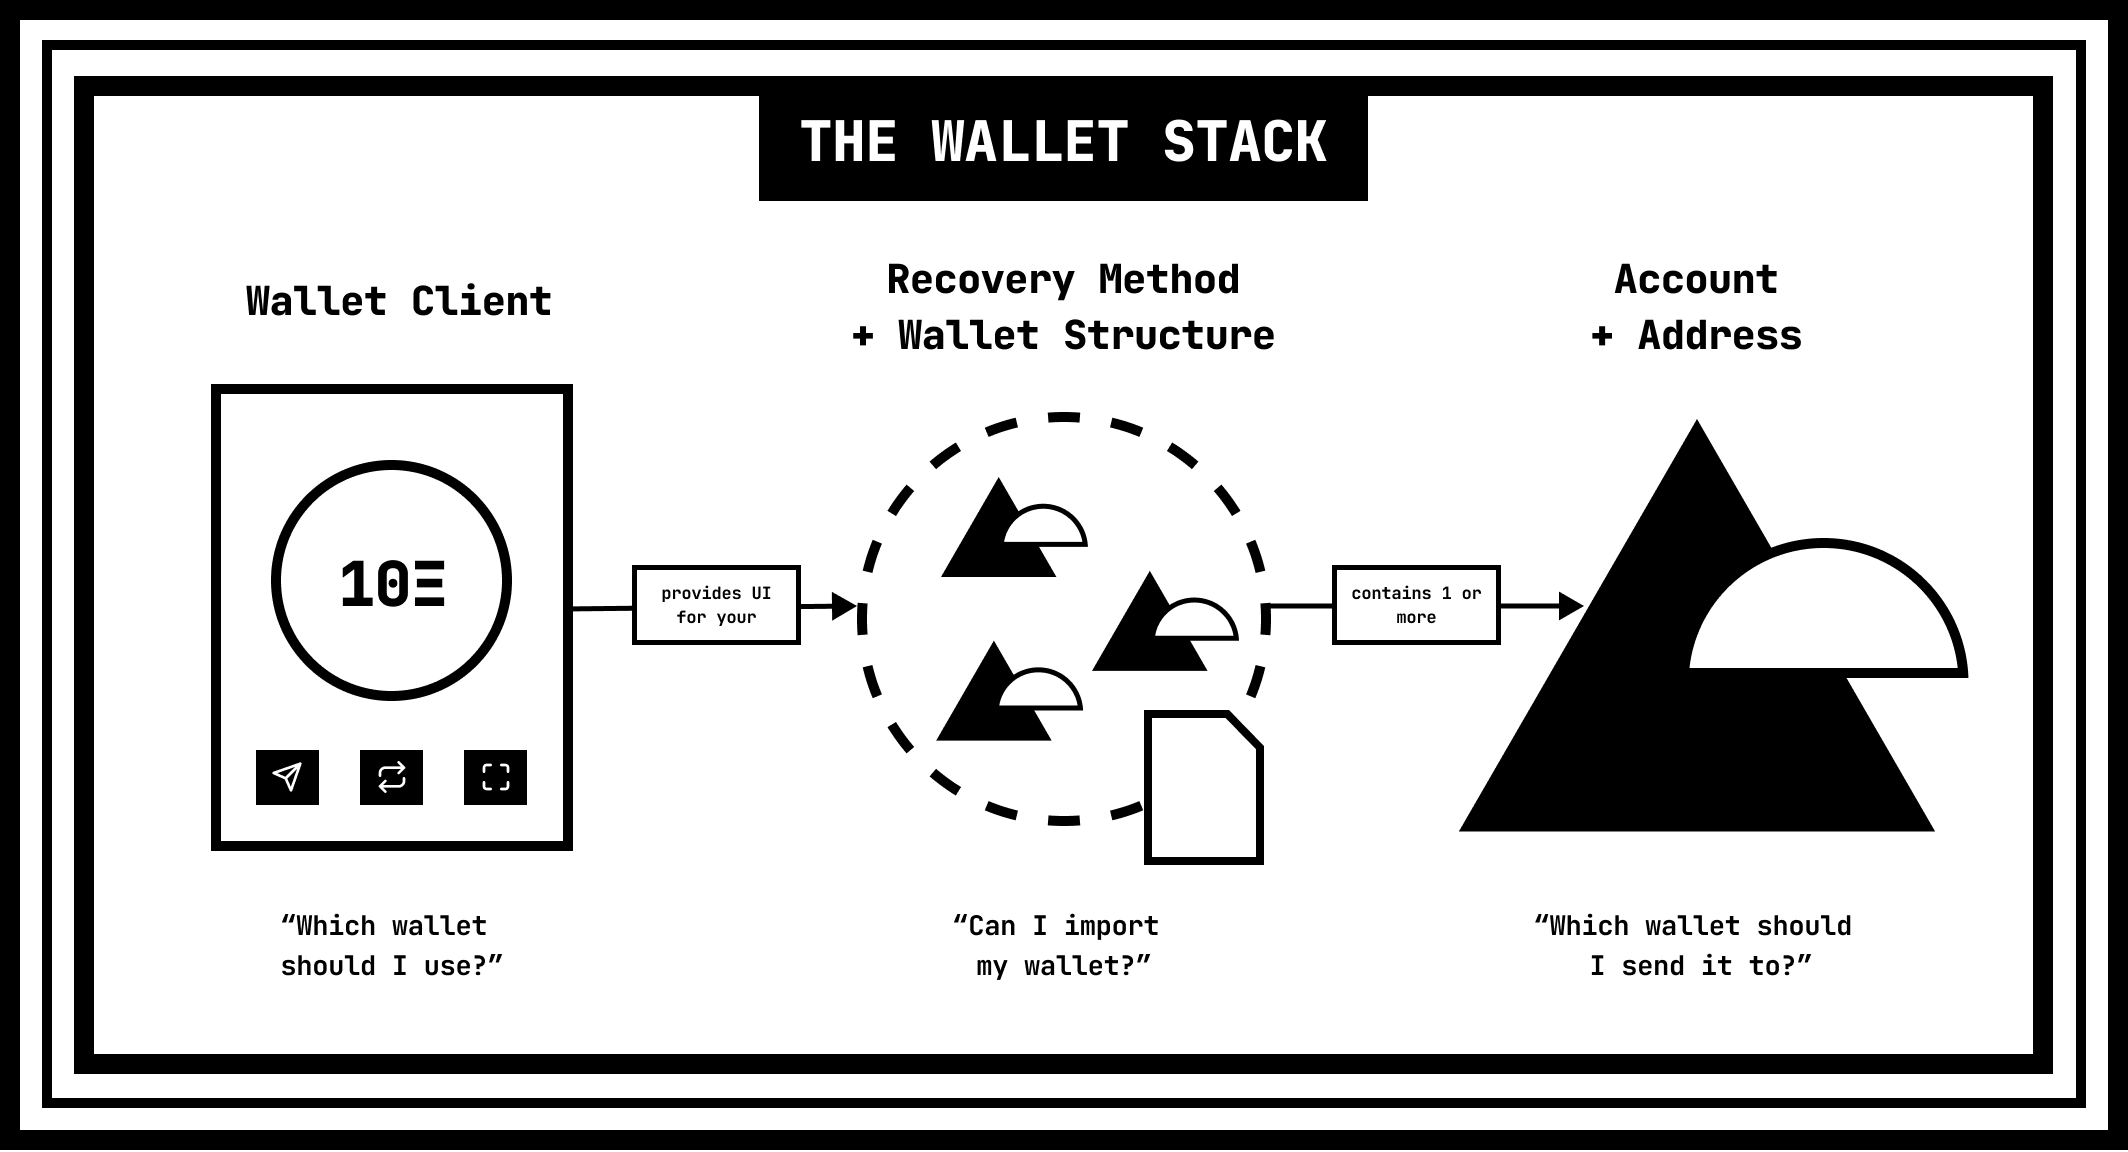 The Wallet Stack consists of: a Wallet Client, a Recovery Method & Wallet Structure, and and Account & Address.